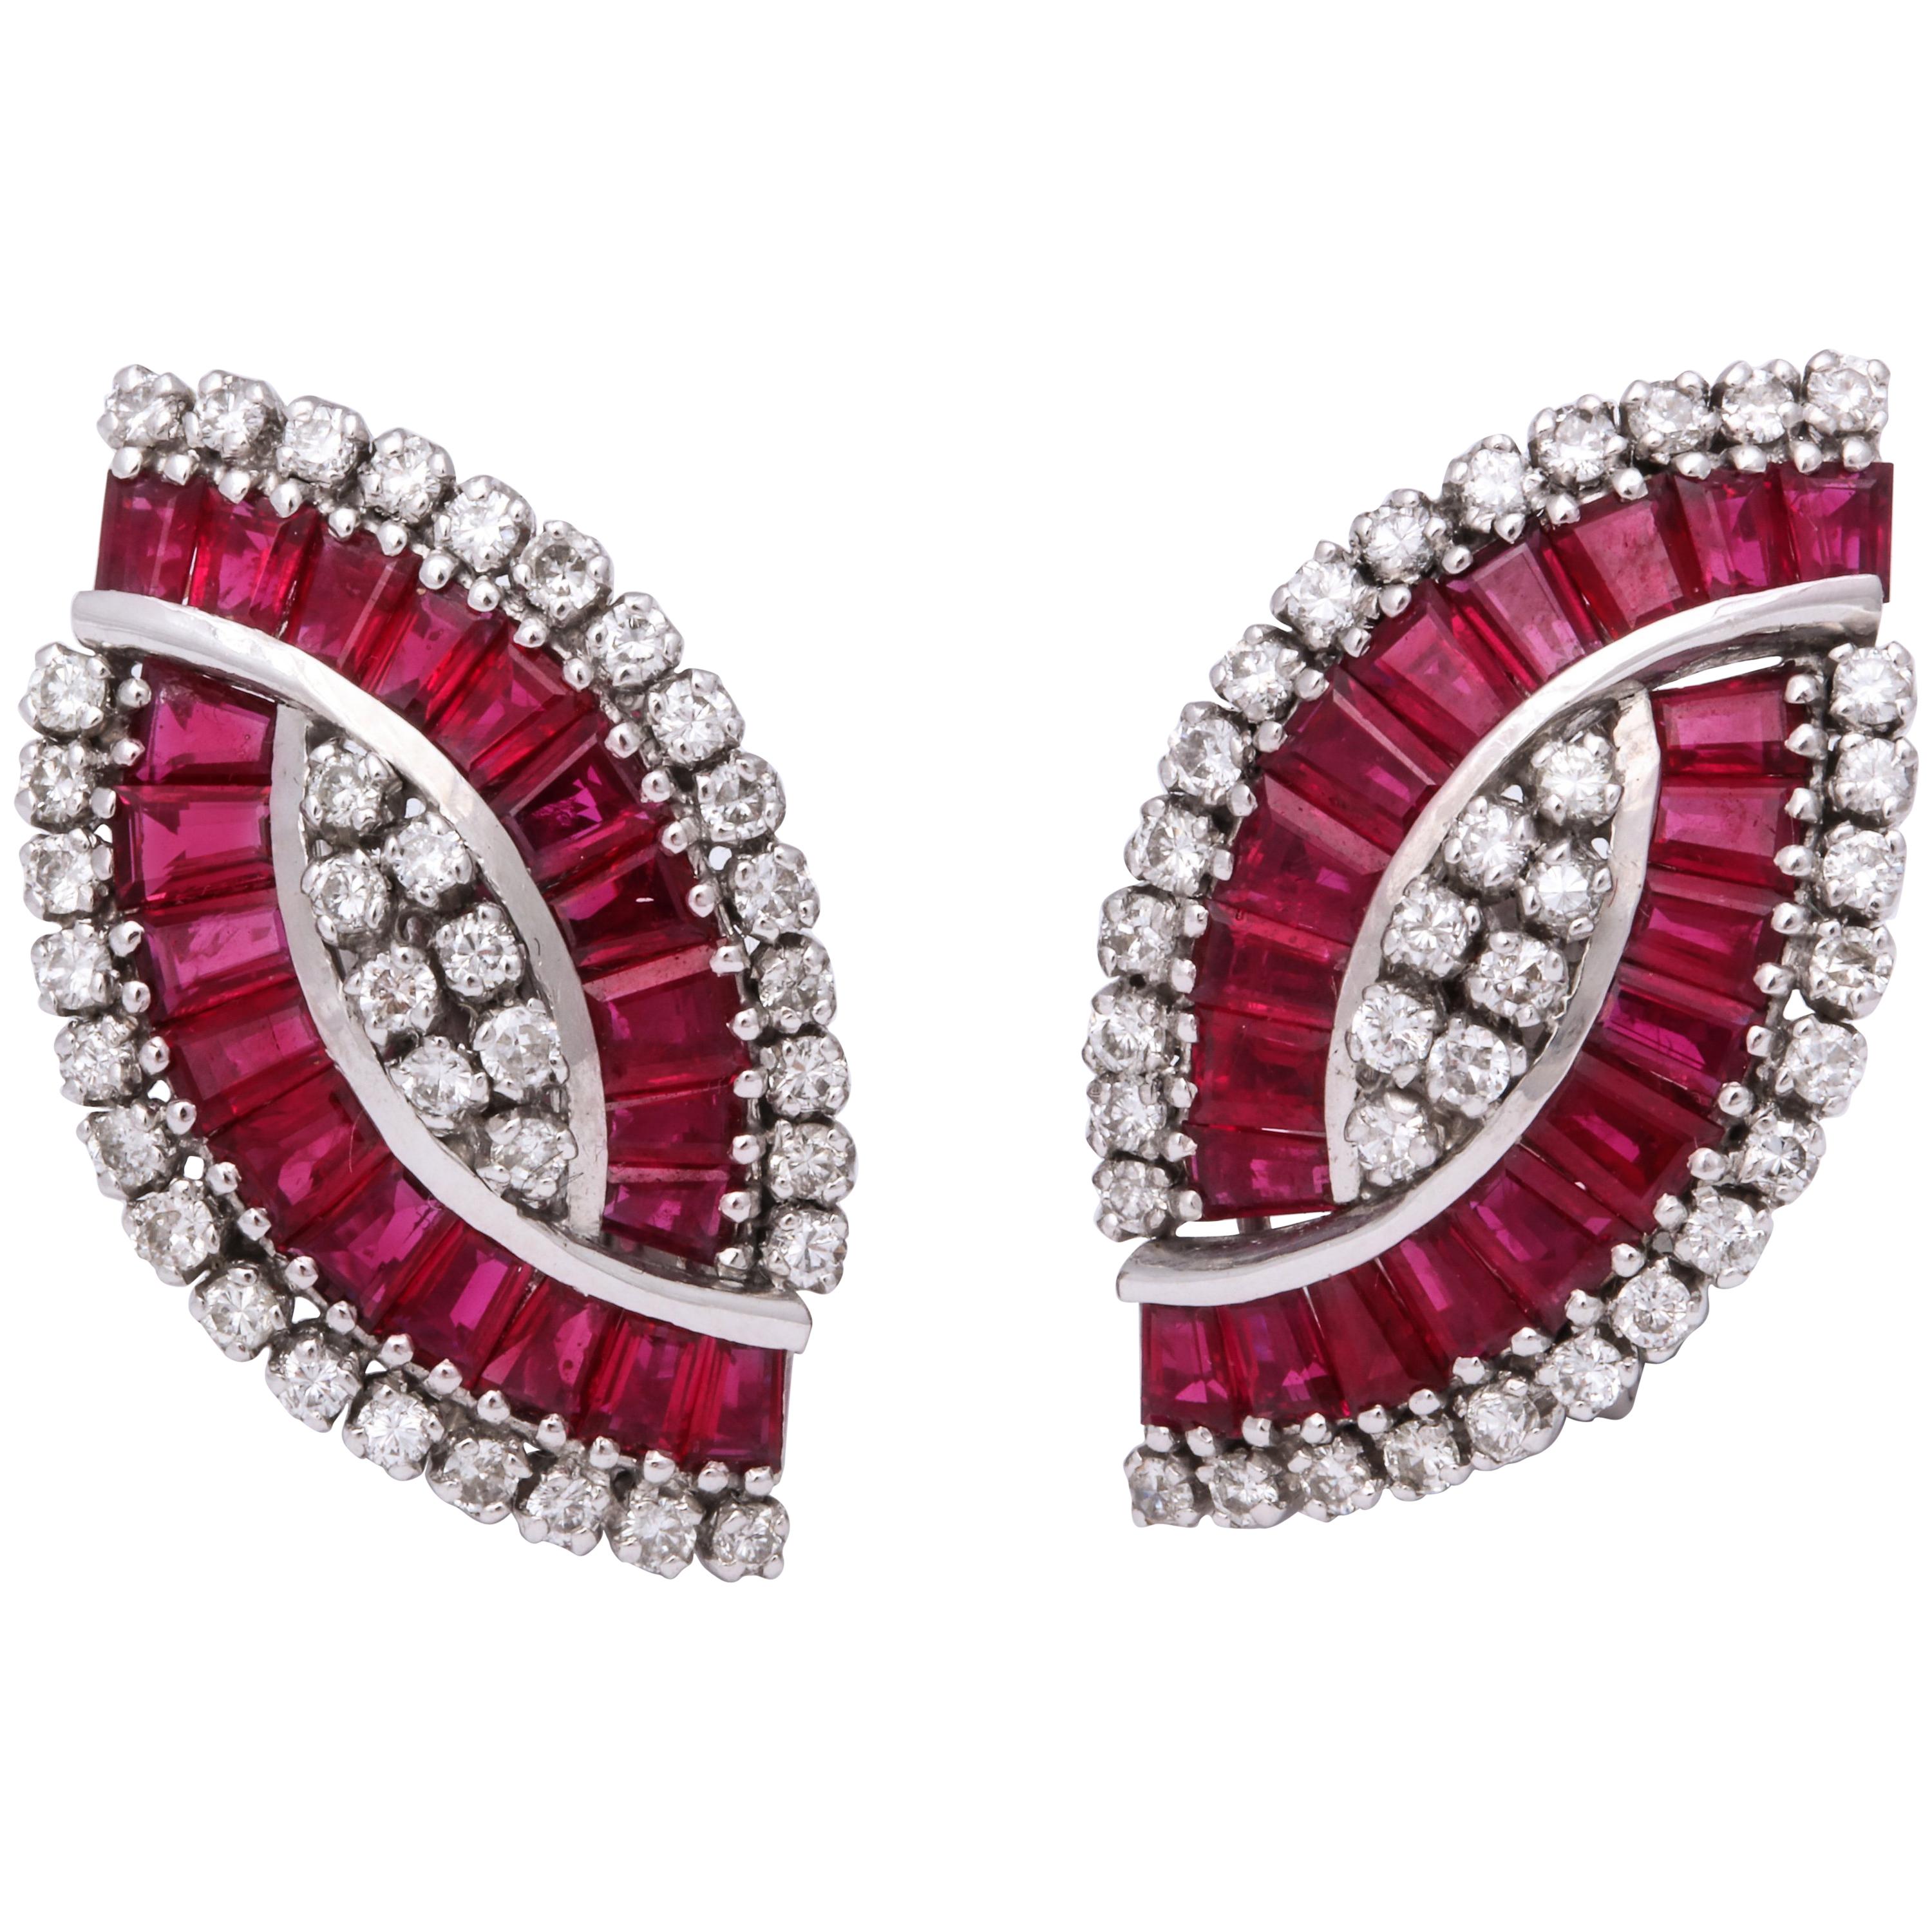  Vintage Natural Ruby and Diamond Earrings White  Gold im Angebot